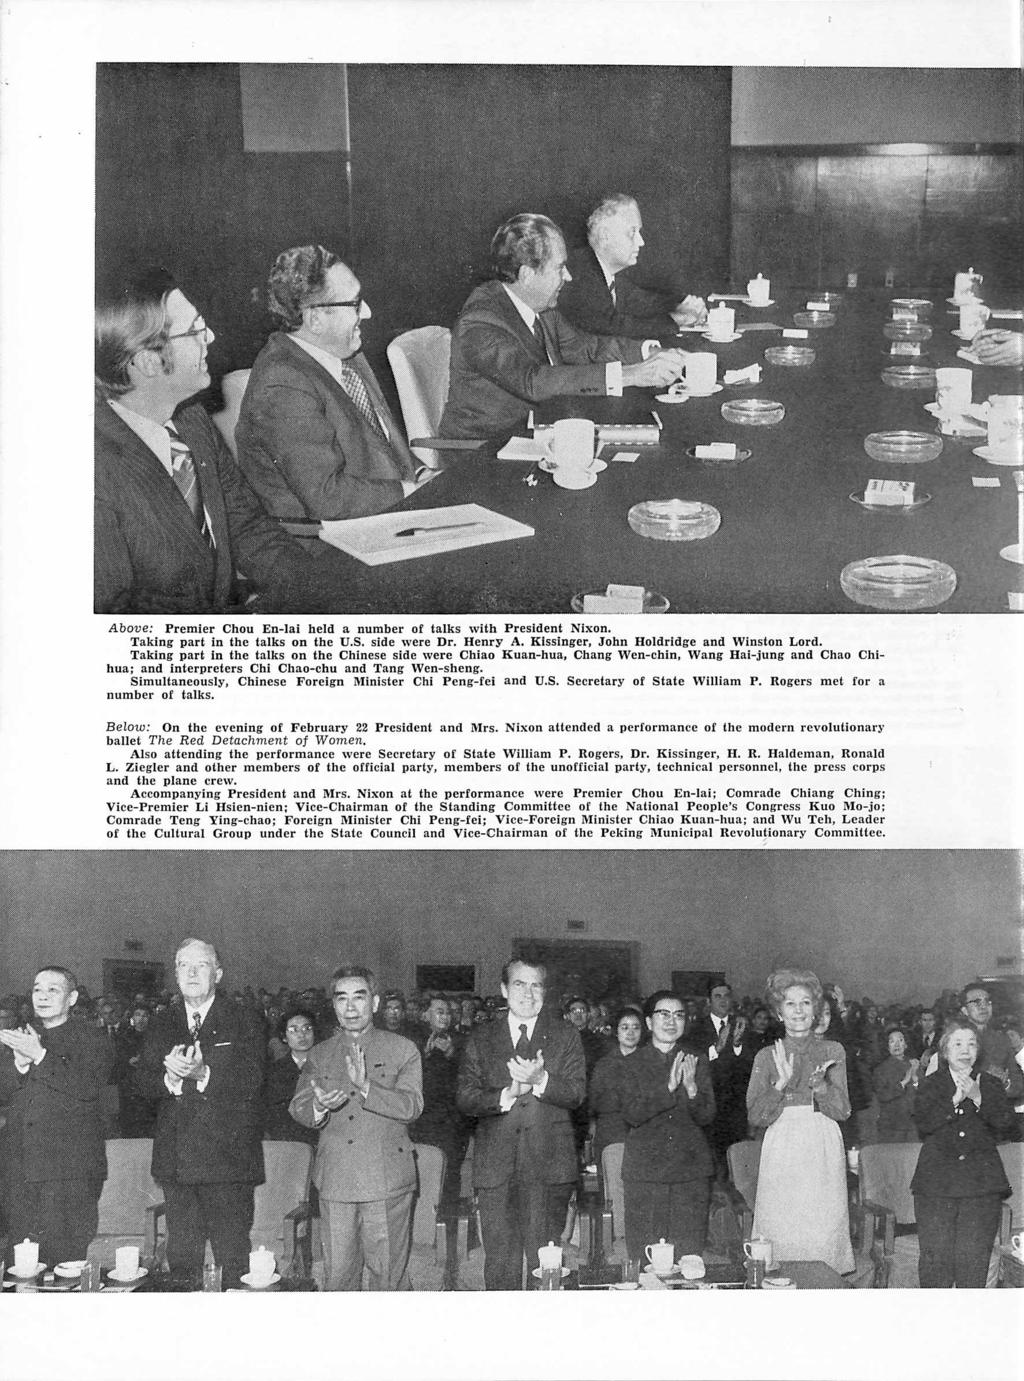 Above: Premier Chou En-Iai held a number of talks with President Nixon. Taking part in the talks on the U.S. side were Dr. Henry A. Kissinger, John Holdridge and Winston Lord.